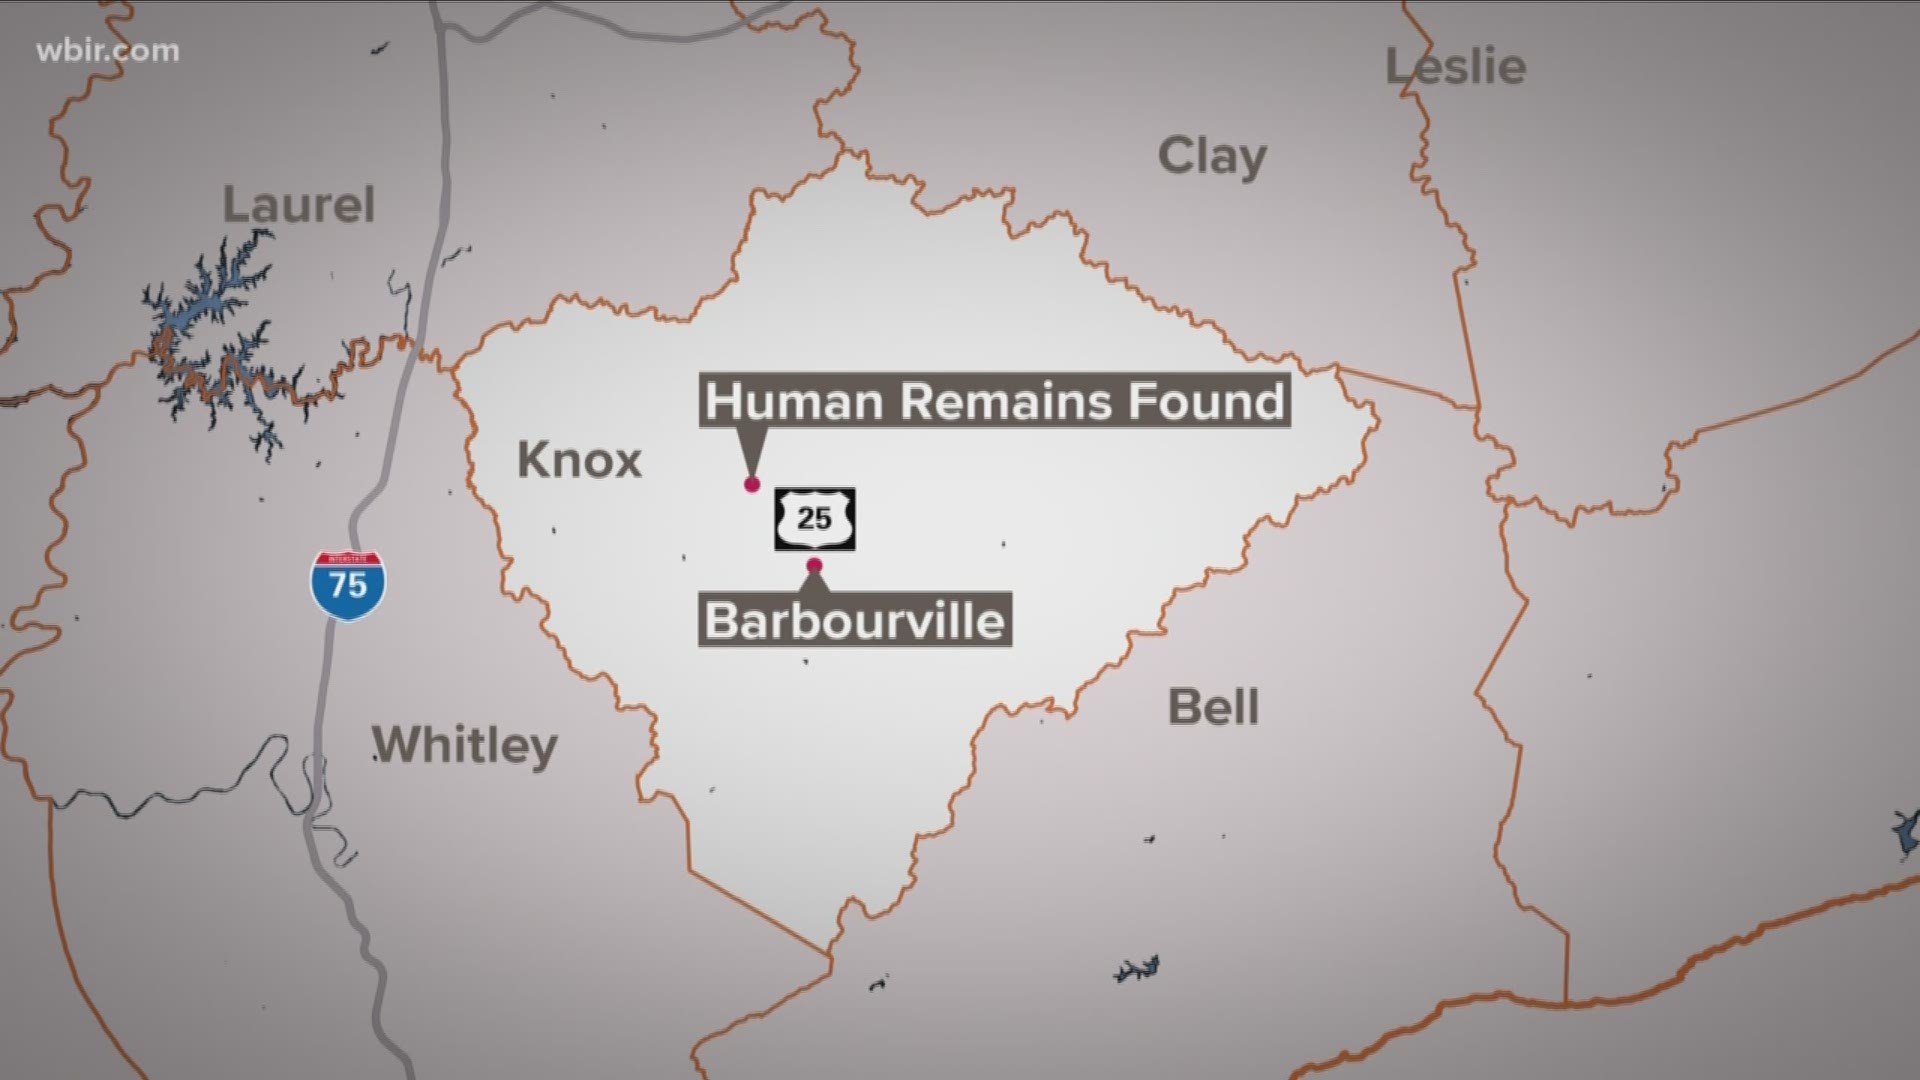 Kentucky State Police say they identified human remains through a pace maker.